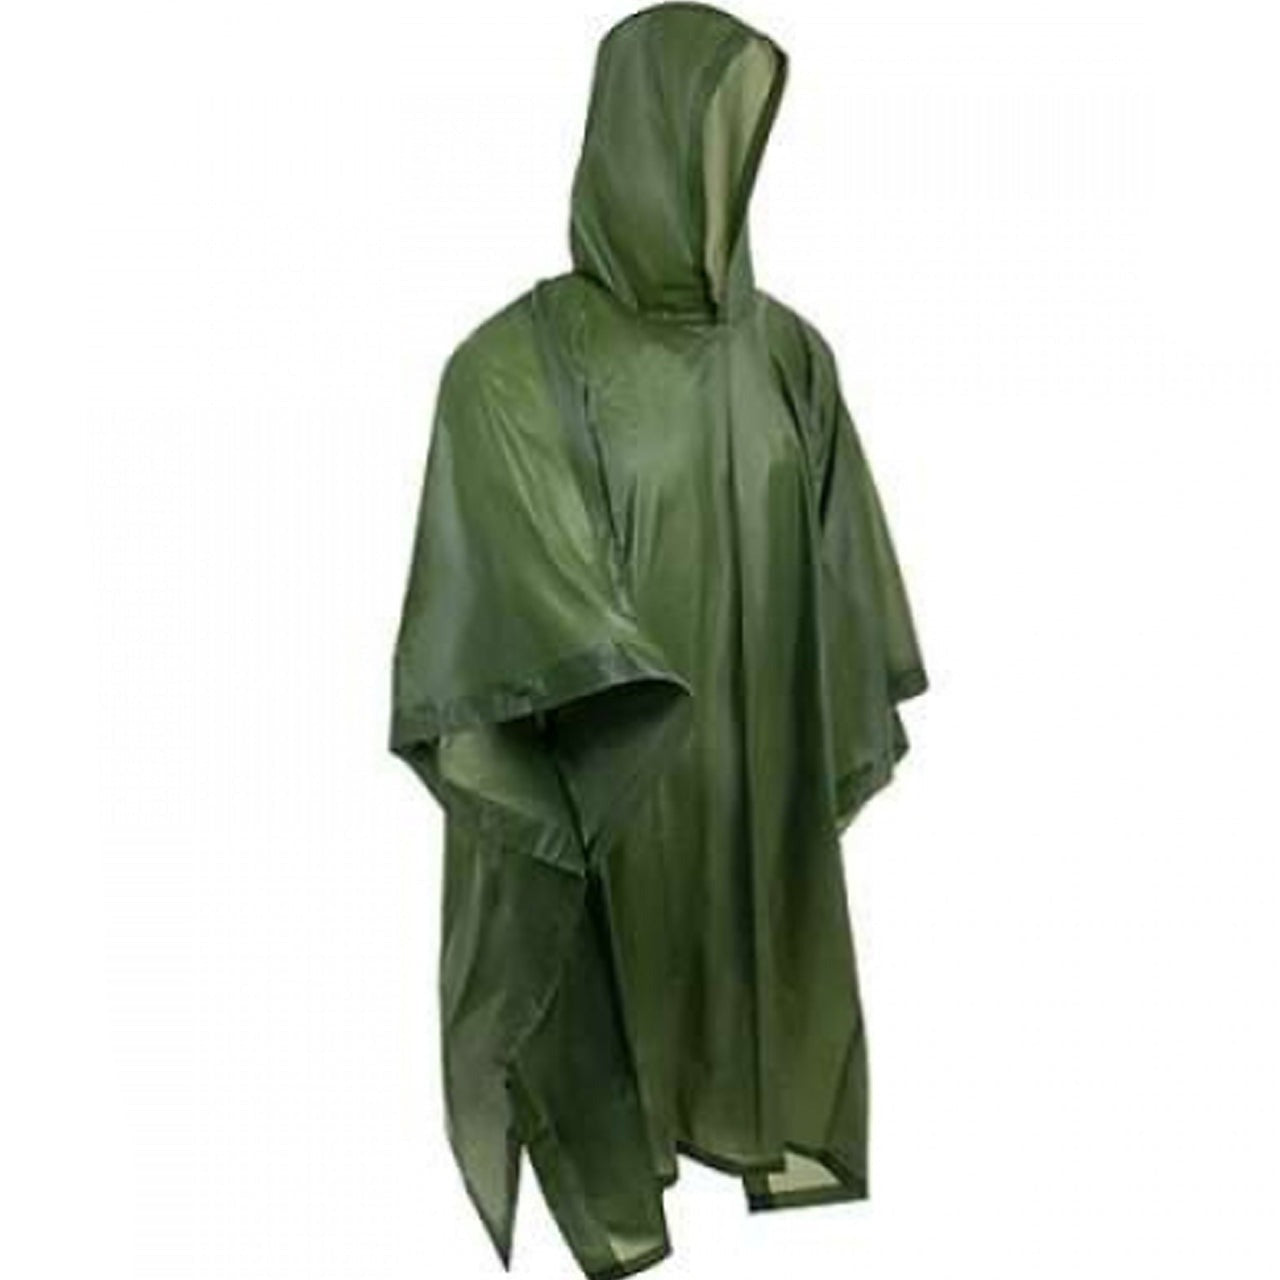 Through wet condition staying covered is a must to keep yourself and camping gear protected. Ideal for fishing, hiking, golf or any outdoor activity whether watching or participating. The poncho is a lightweight and durable it’s a great item to have stored in with camping accessories before the adventure begins. www.moralepatches.com.au